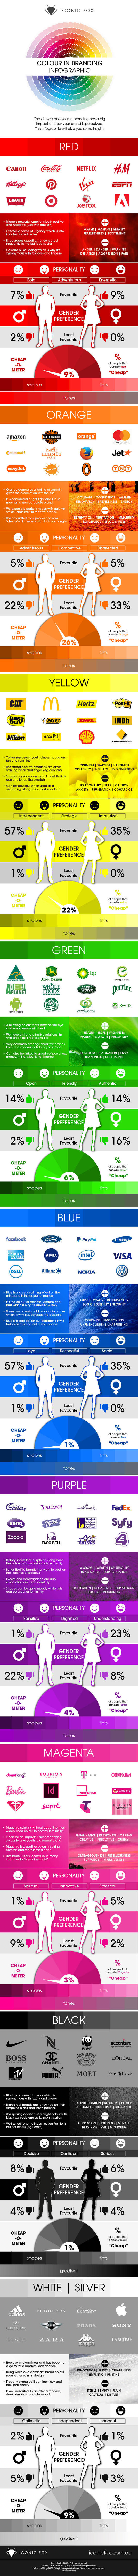 How to choose the right colors for your brand (Infographic)